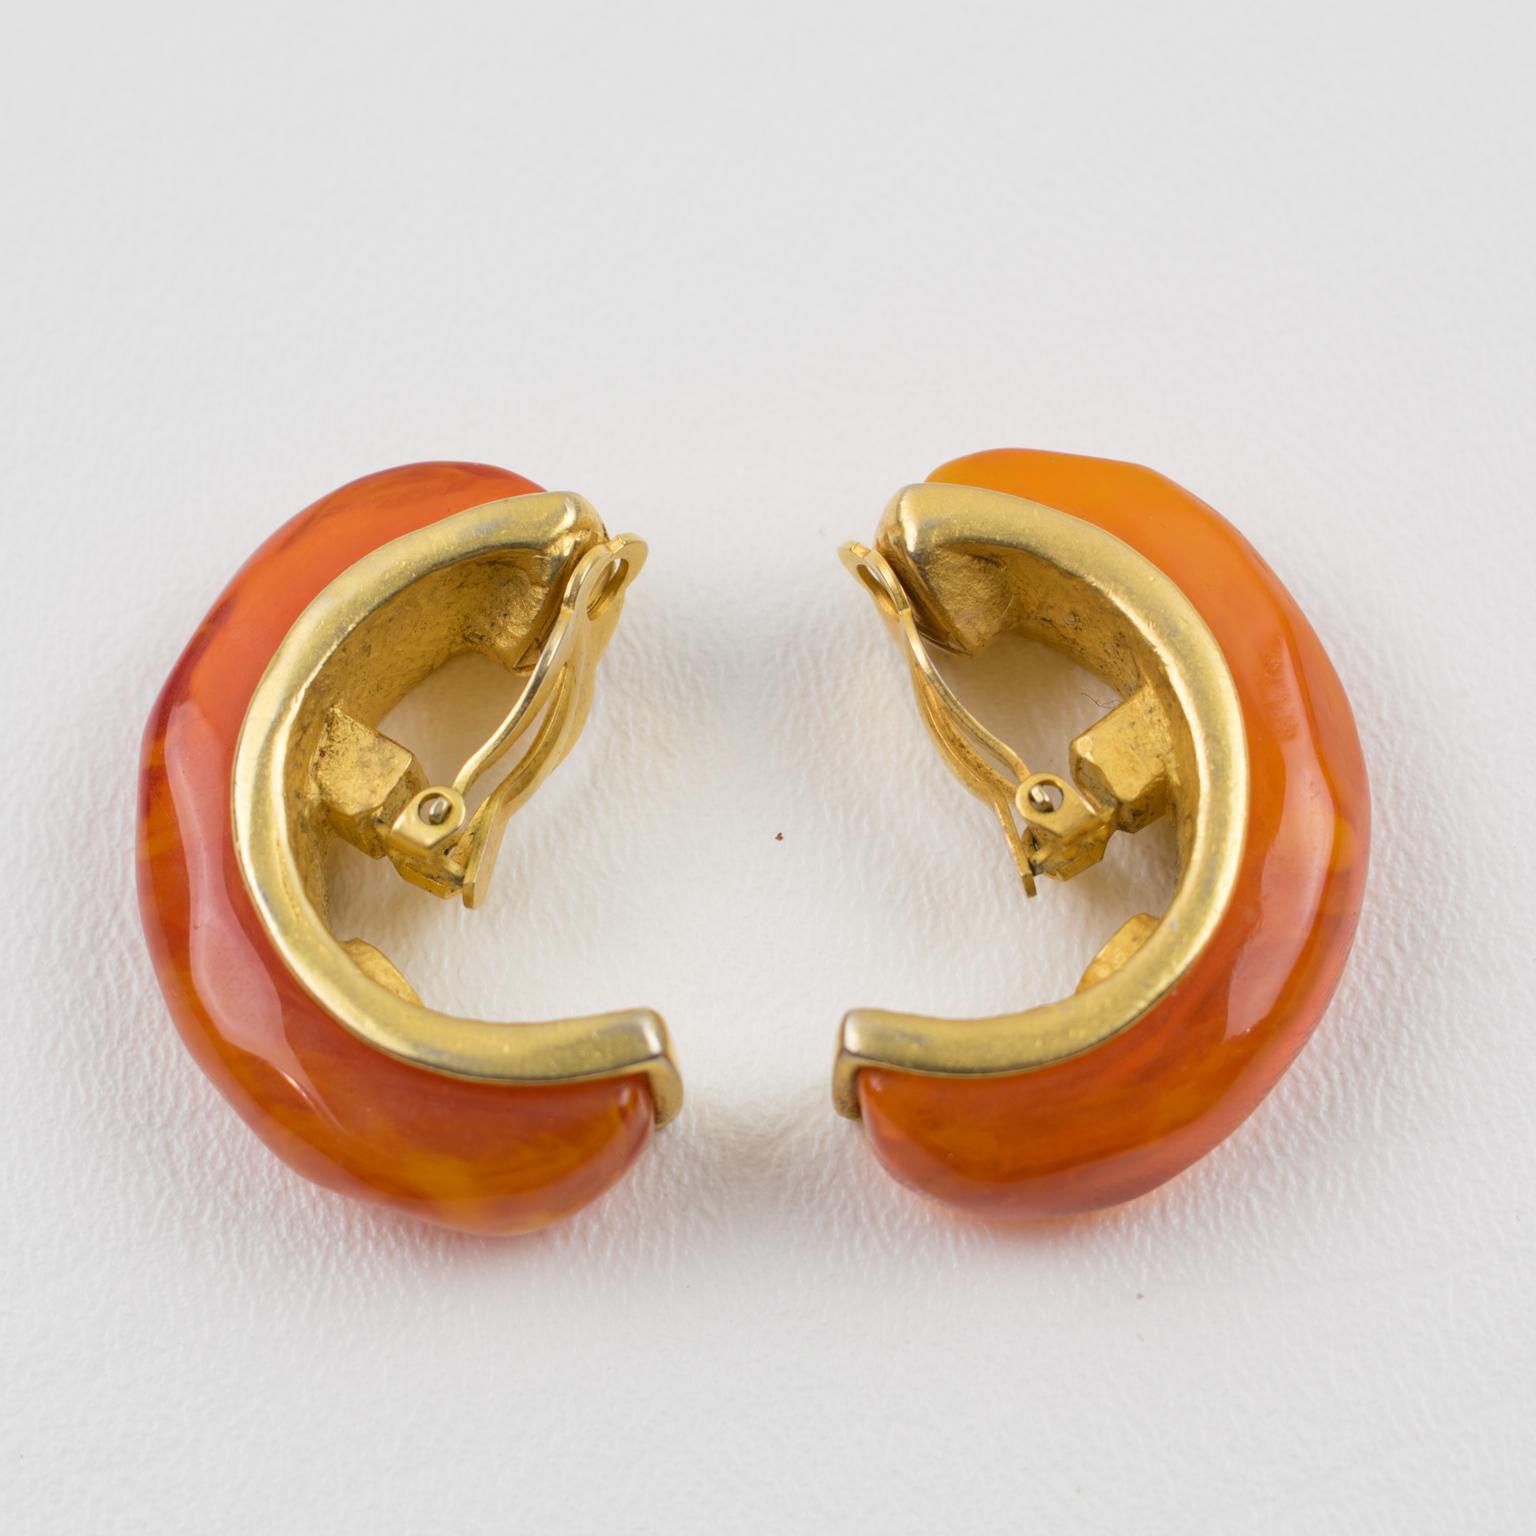 Exquisite Karl Lagerfeld Paris signed clip-on earrings. Large hoop shape with geometric design in brushed gilt metal, topped with carved, faceted orange marble resin ornament. Marked underside with the 